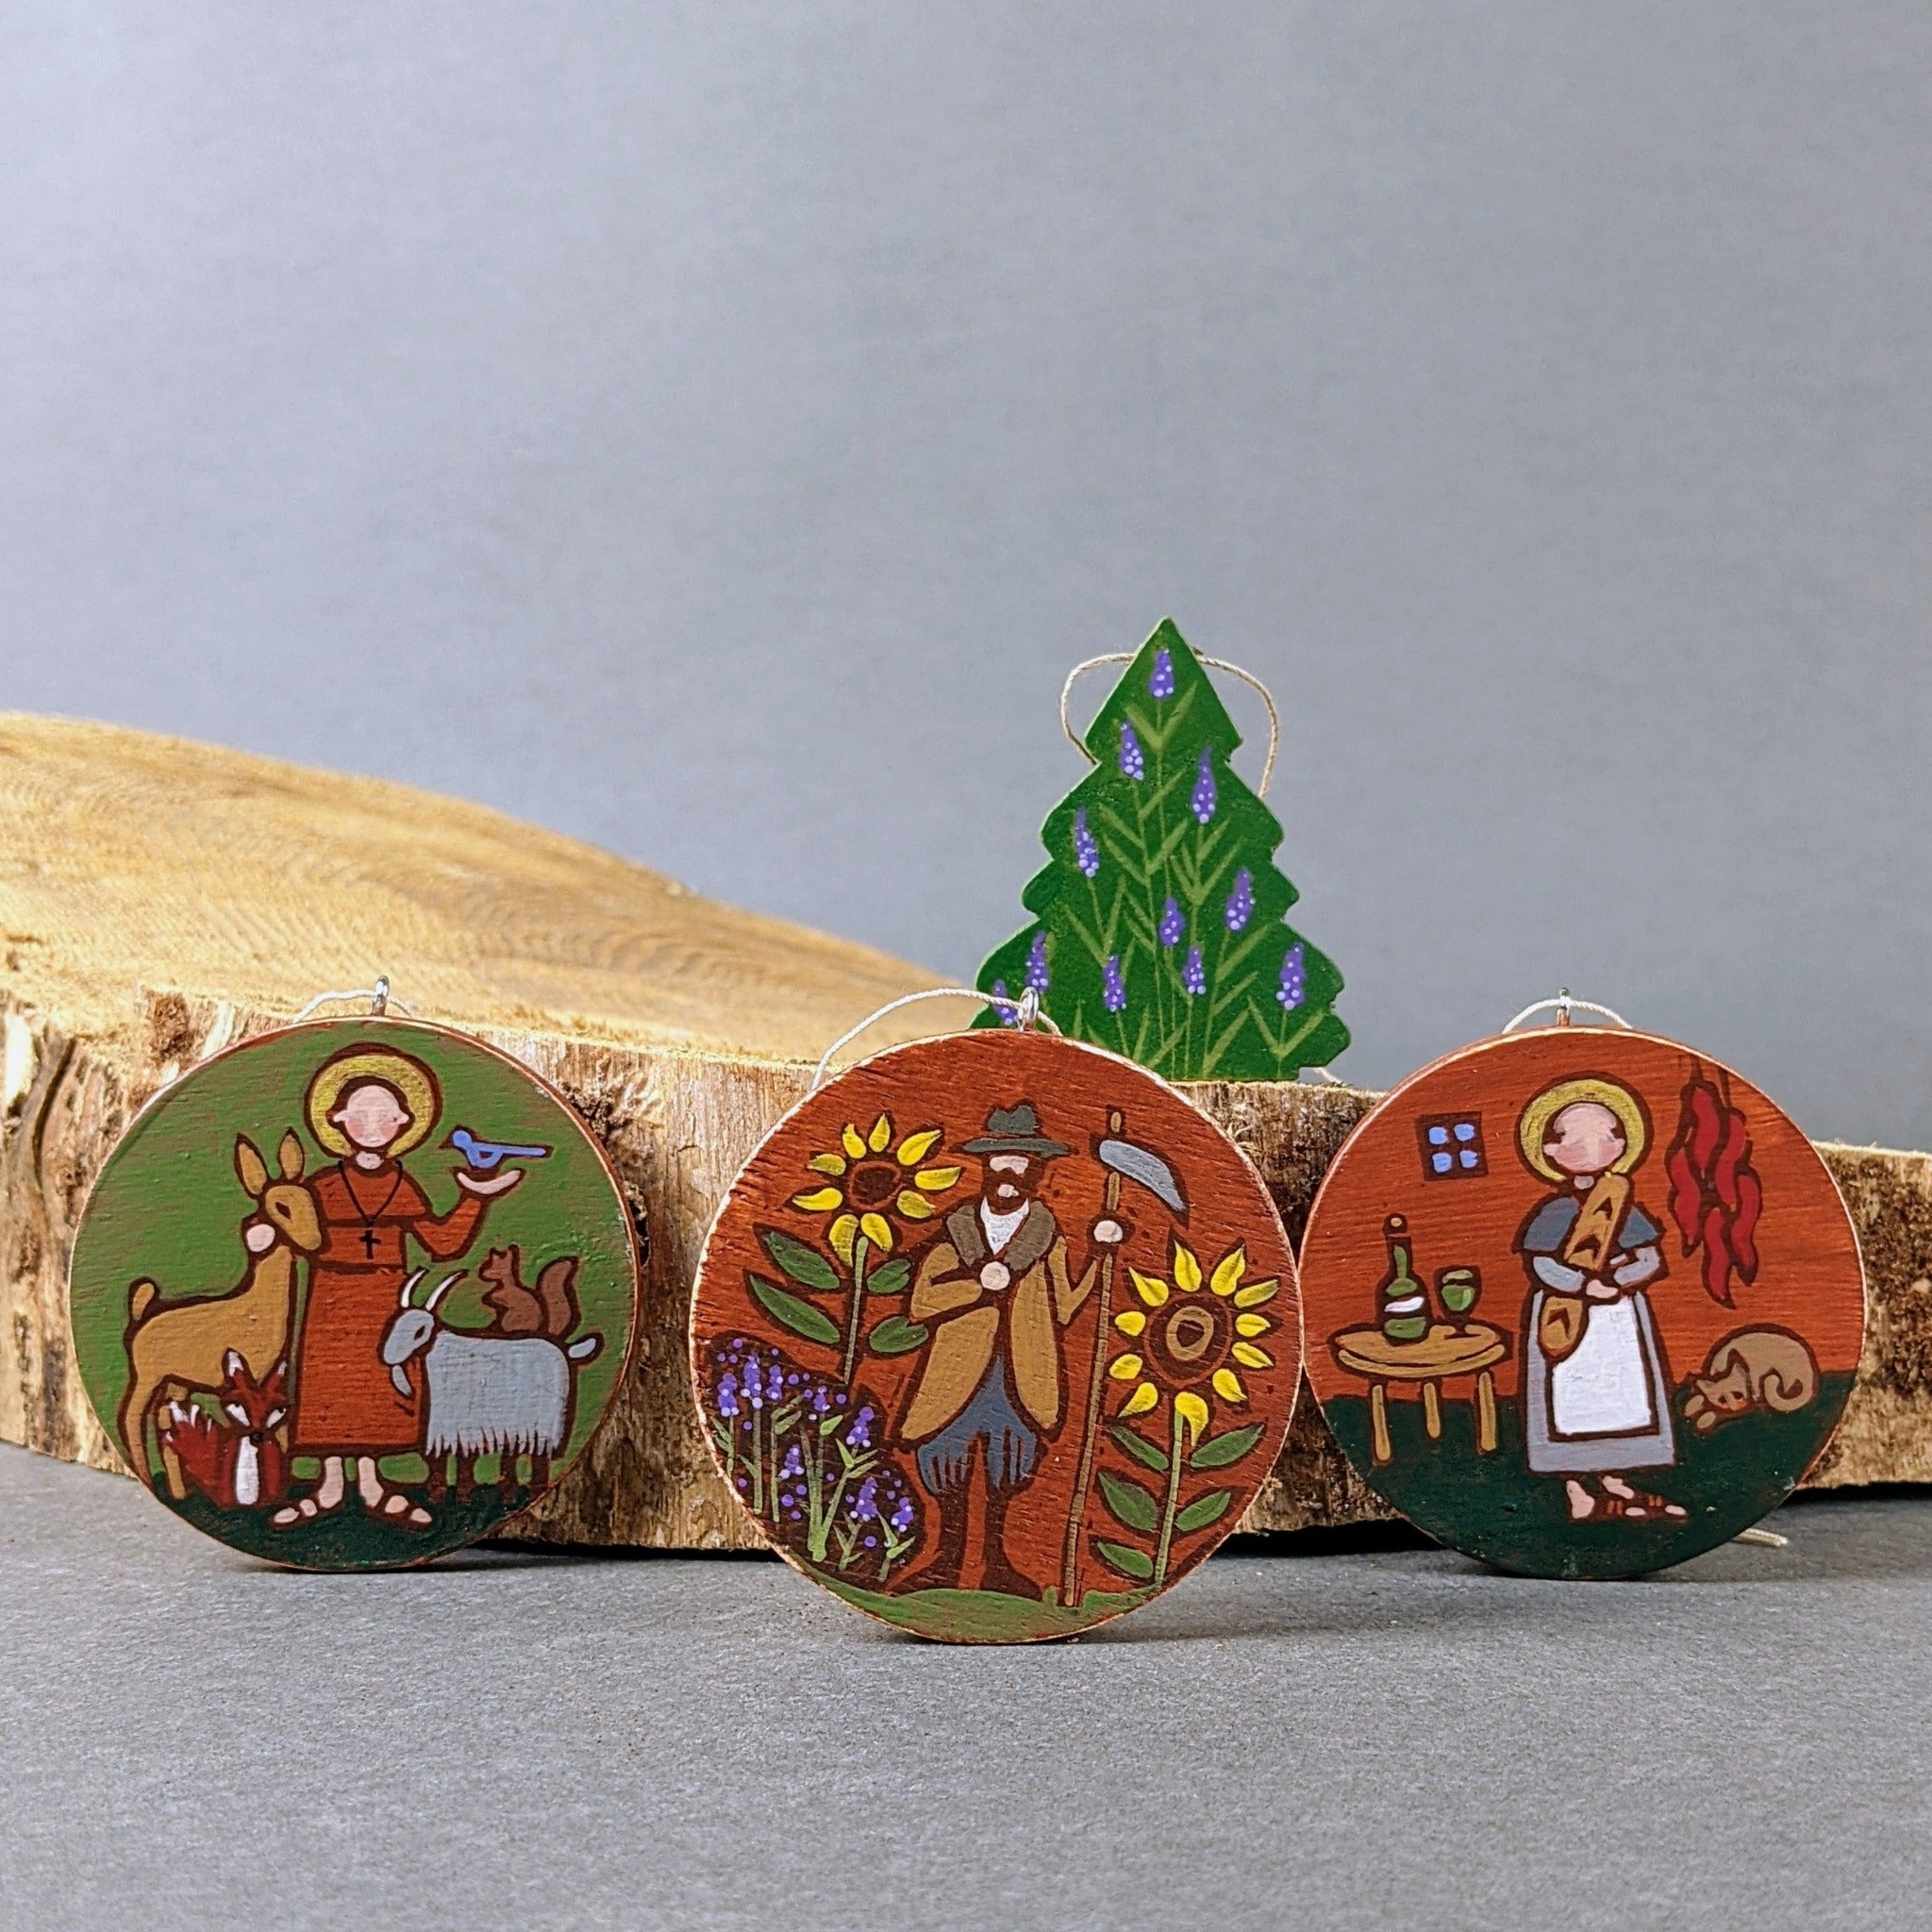 Hand-painted Wooden Ornaments by Jone Hallmark